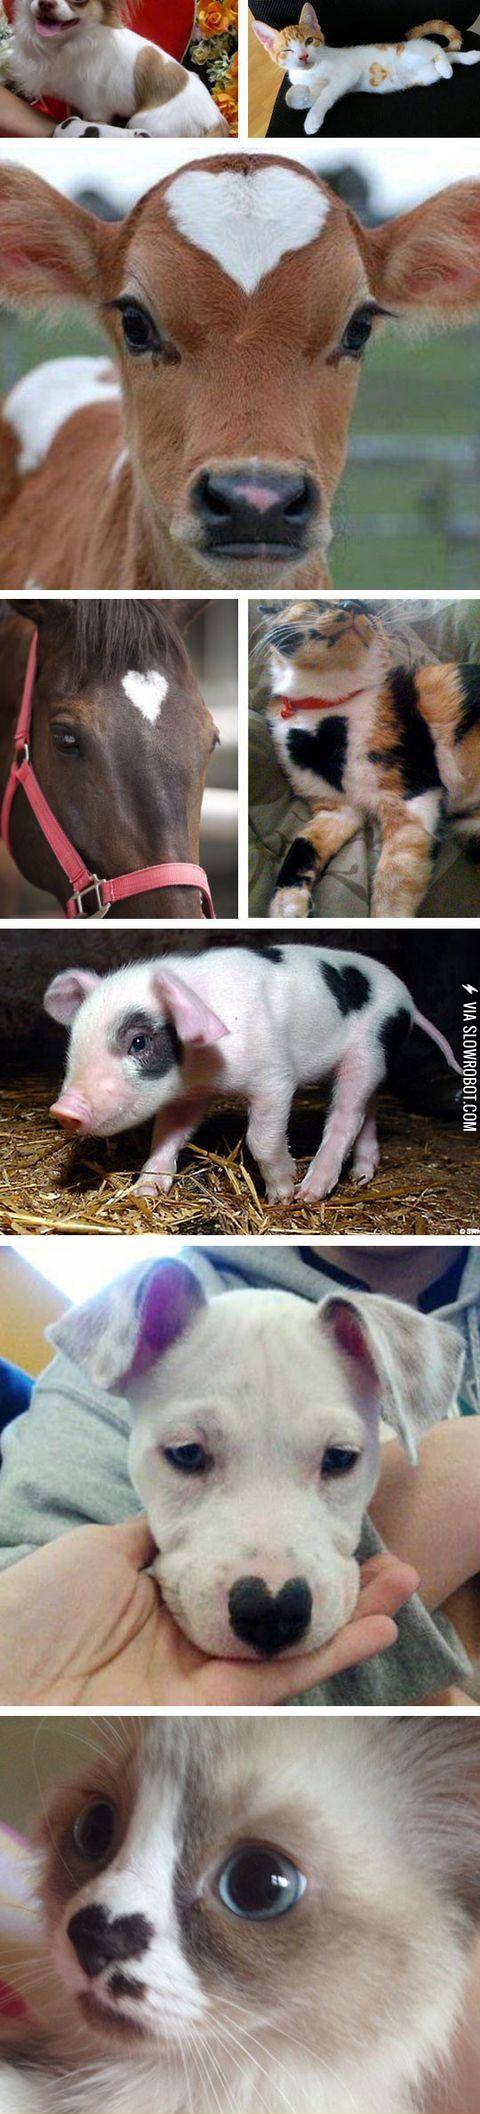 Animals+with+heart+markings